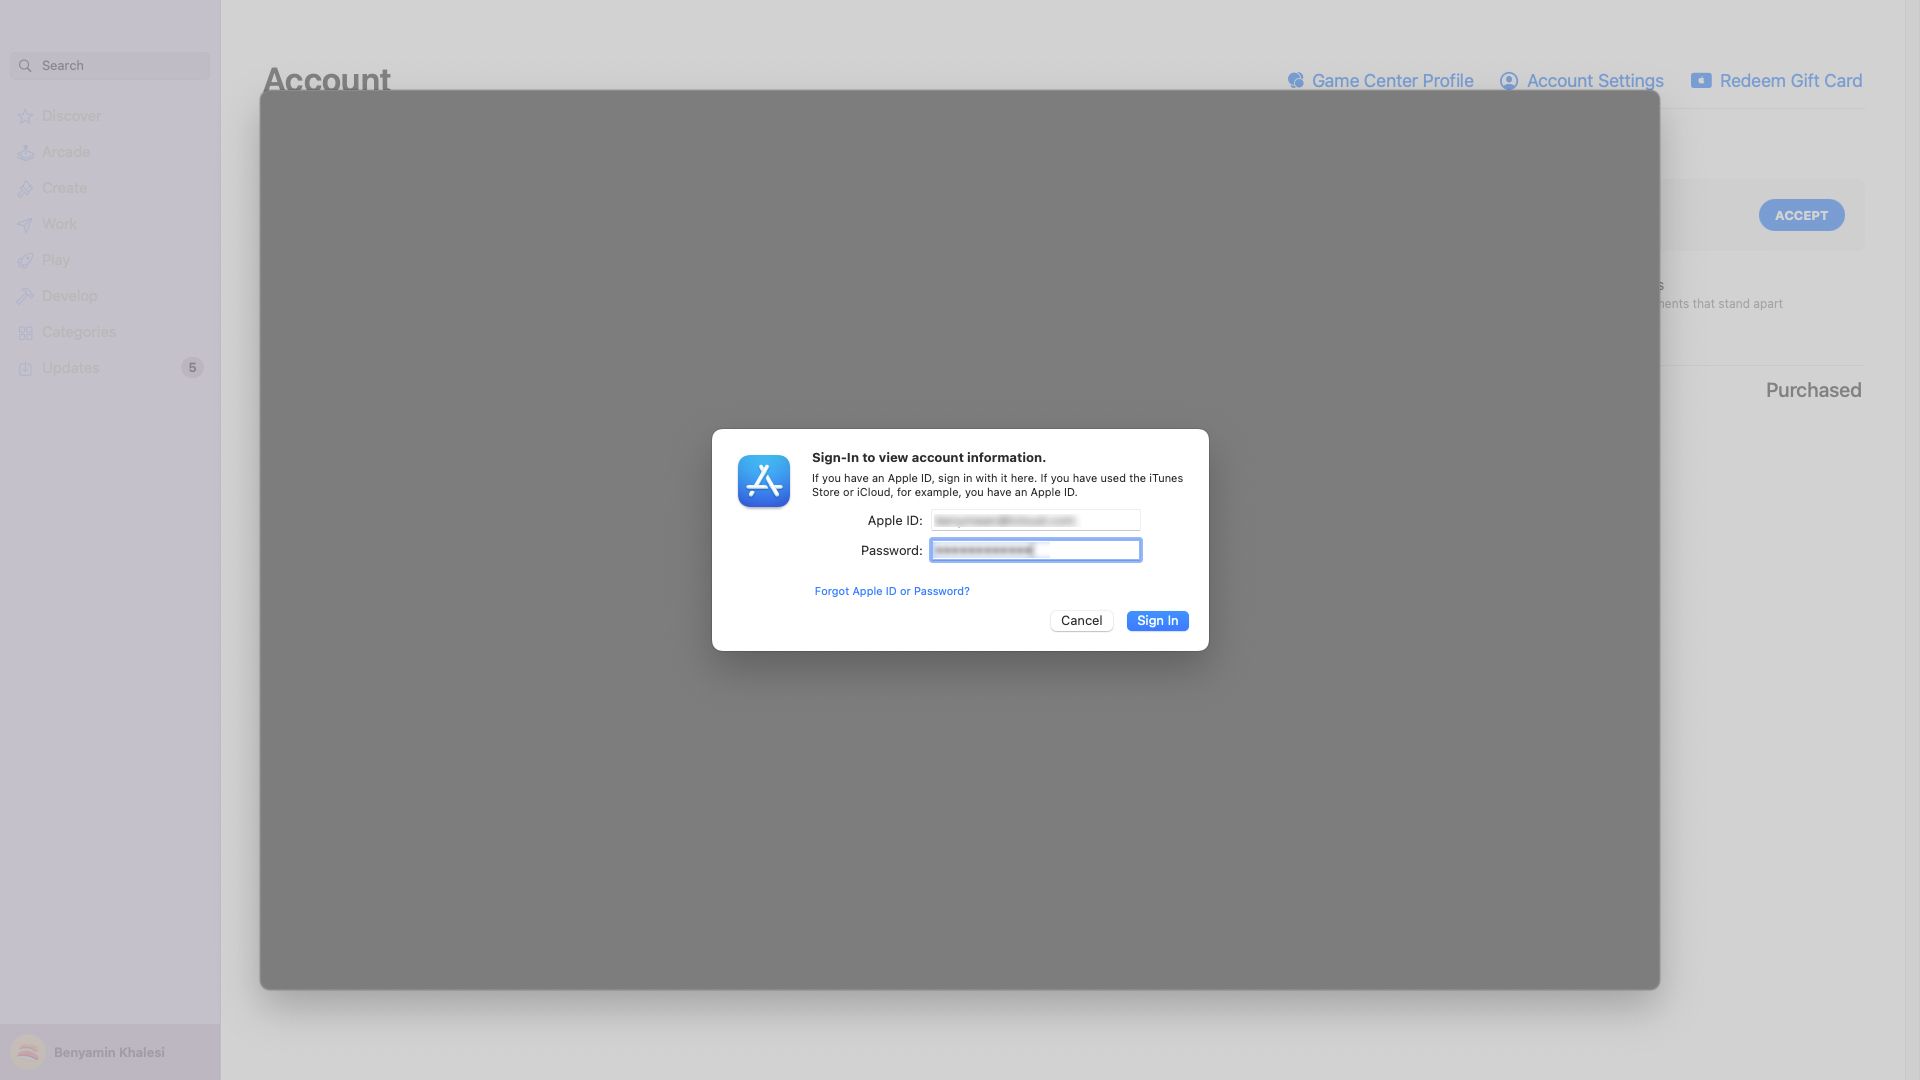 Screenshot of an Apple pop-up window on macOS, requesting credentials to sign in and access account information.